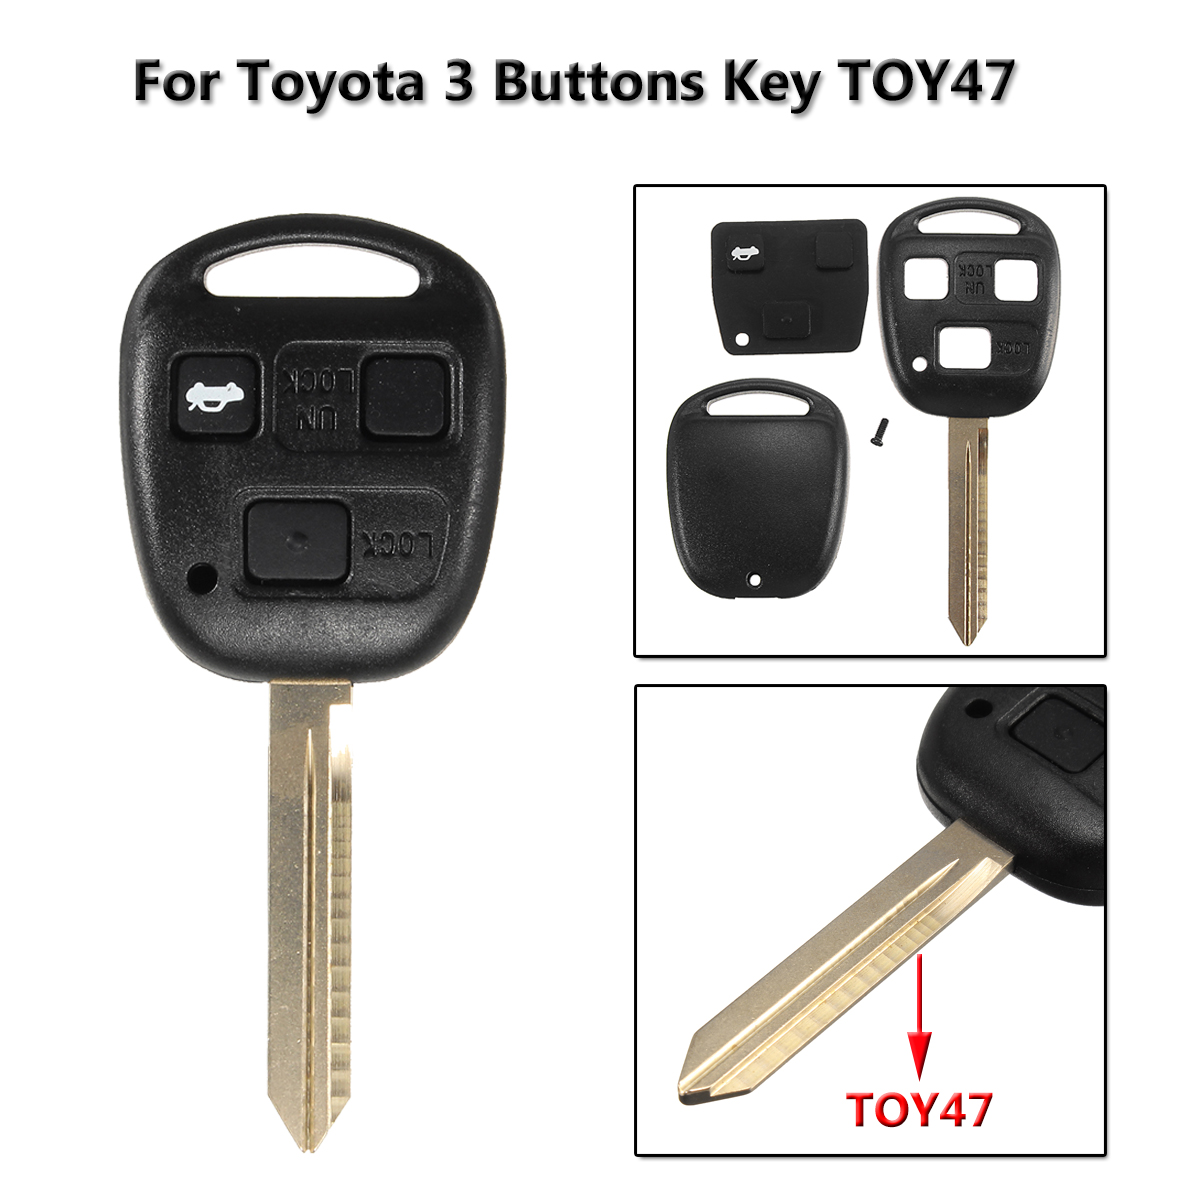 3-Button-Remote-Key-Case-Fob-Toy47-for-Toyota-Corolla-Camry-Yaris-Hiace-Avensis-1216240